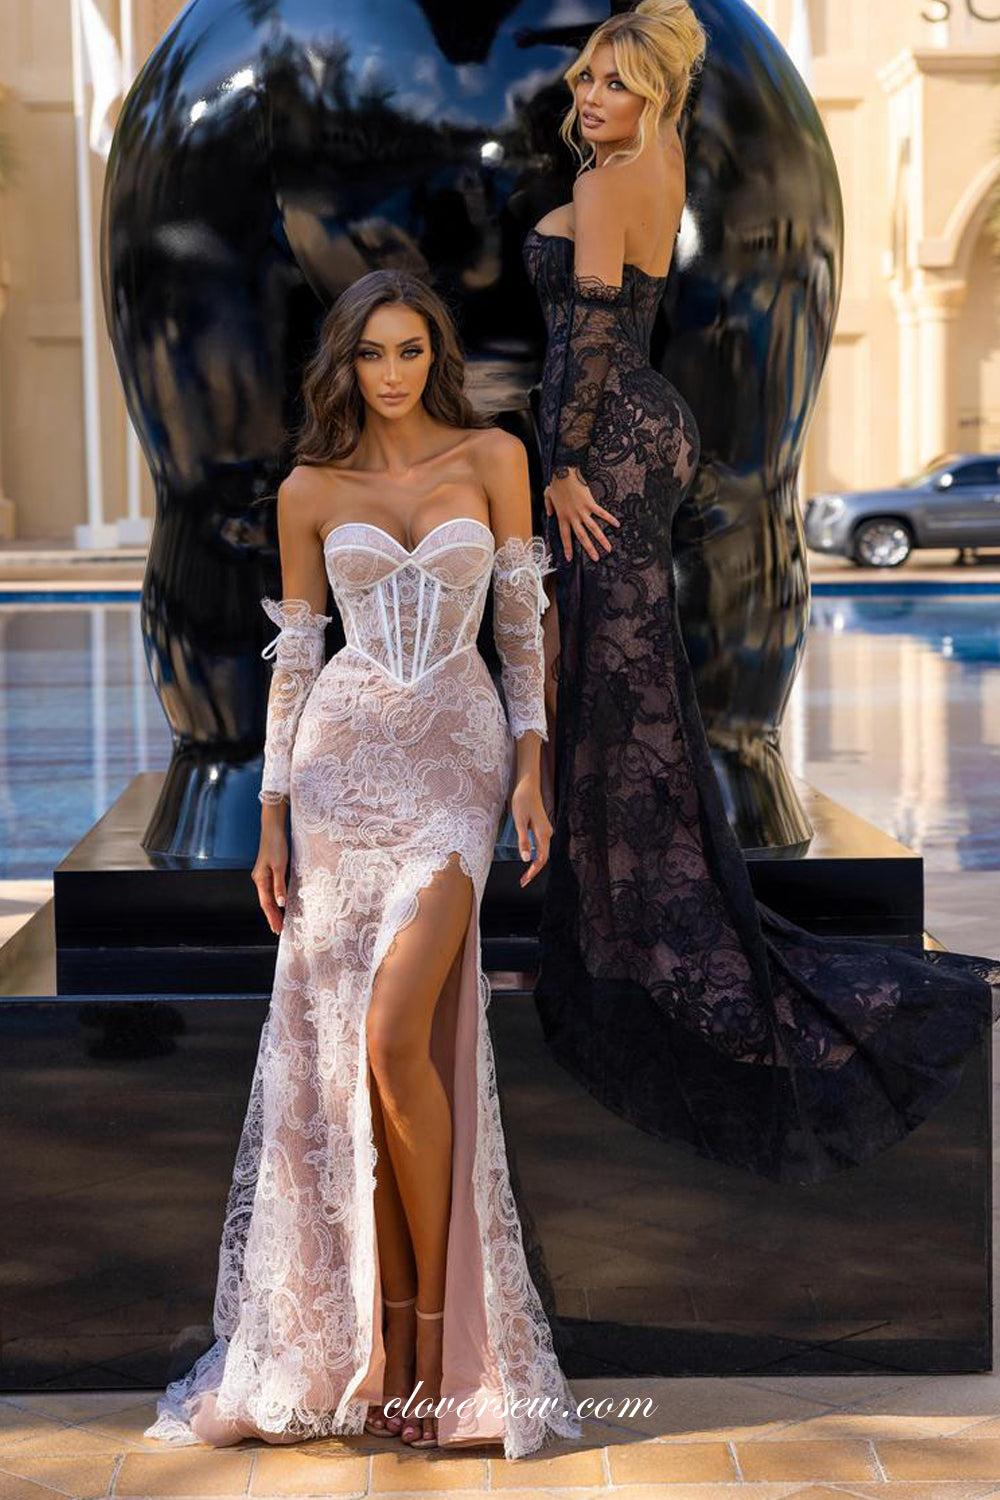 Black Fully Lace Strapless Mermaid With Slit Wedding Dresses With Stylish Sleeves, CW0368